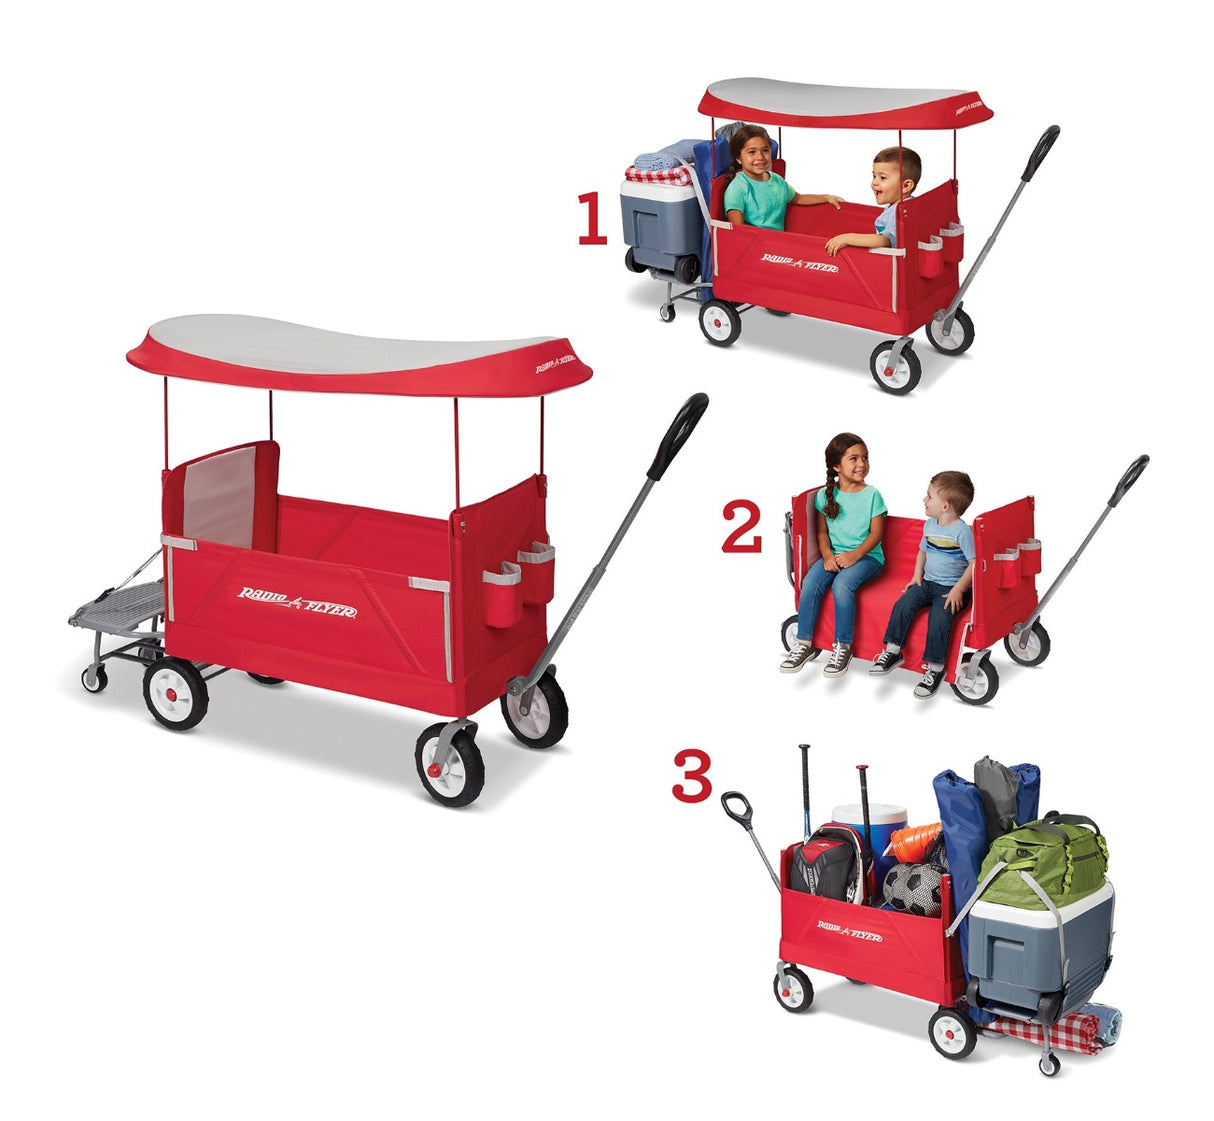 3-In-1 Tailgater Wagon® With Canopy 3 Wagons In 1: Two Rider Seating